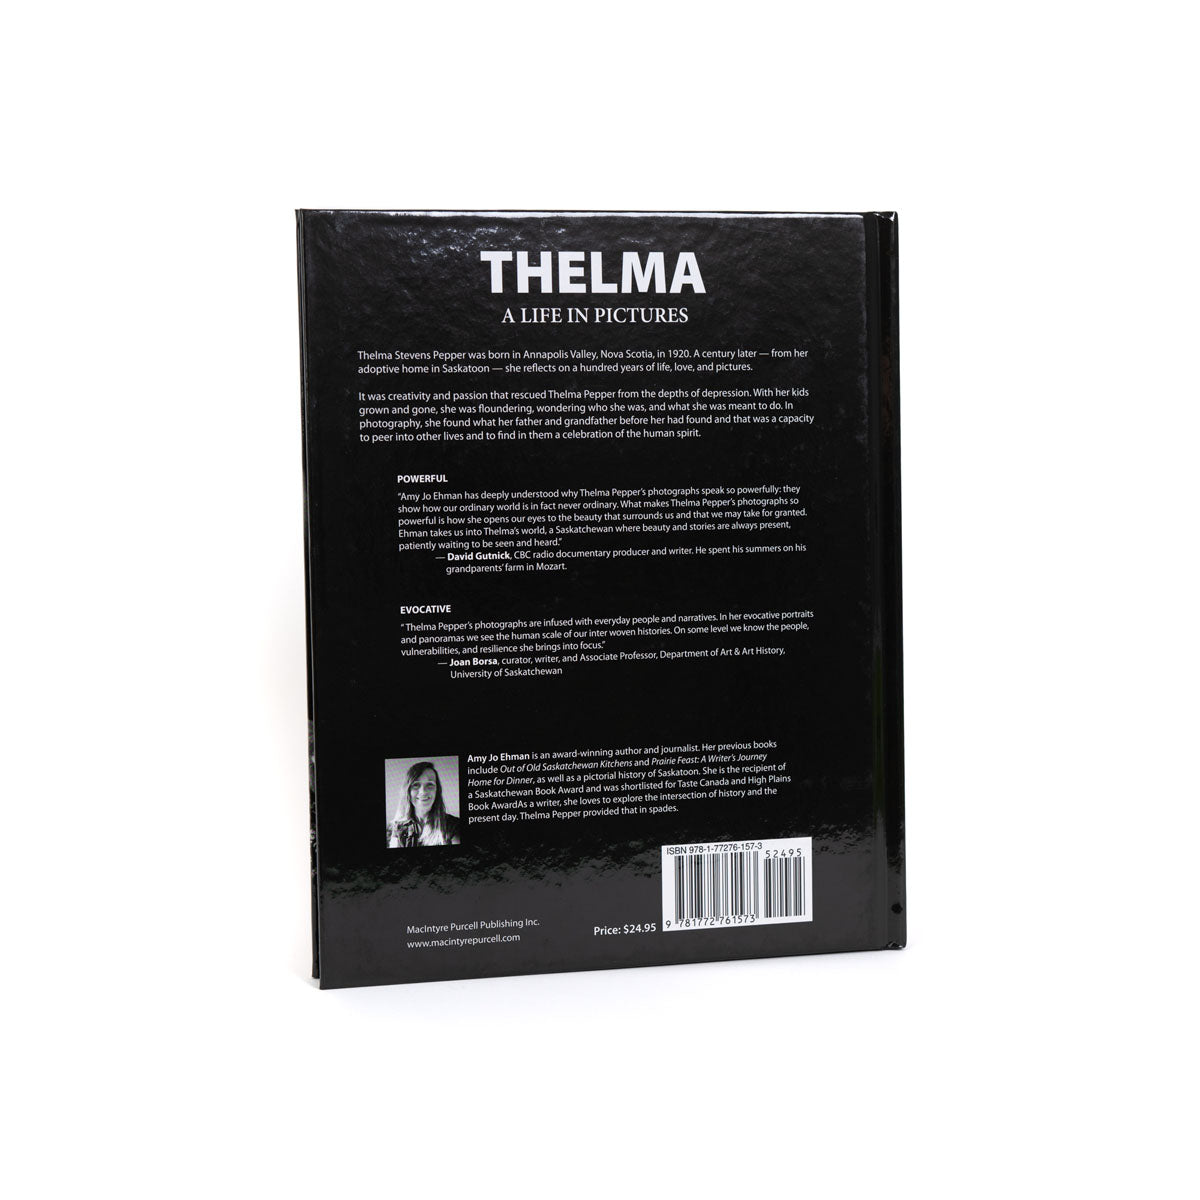 Thelma A life in pictures